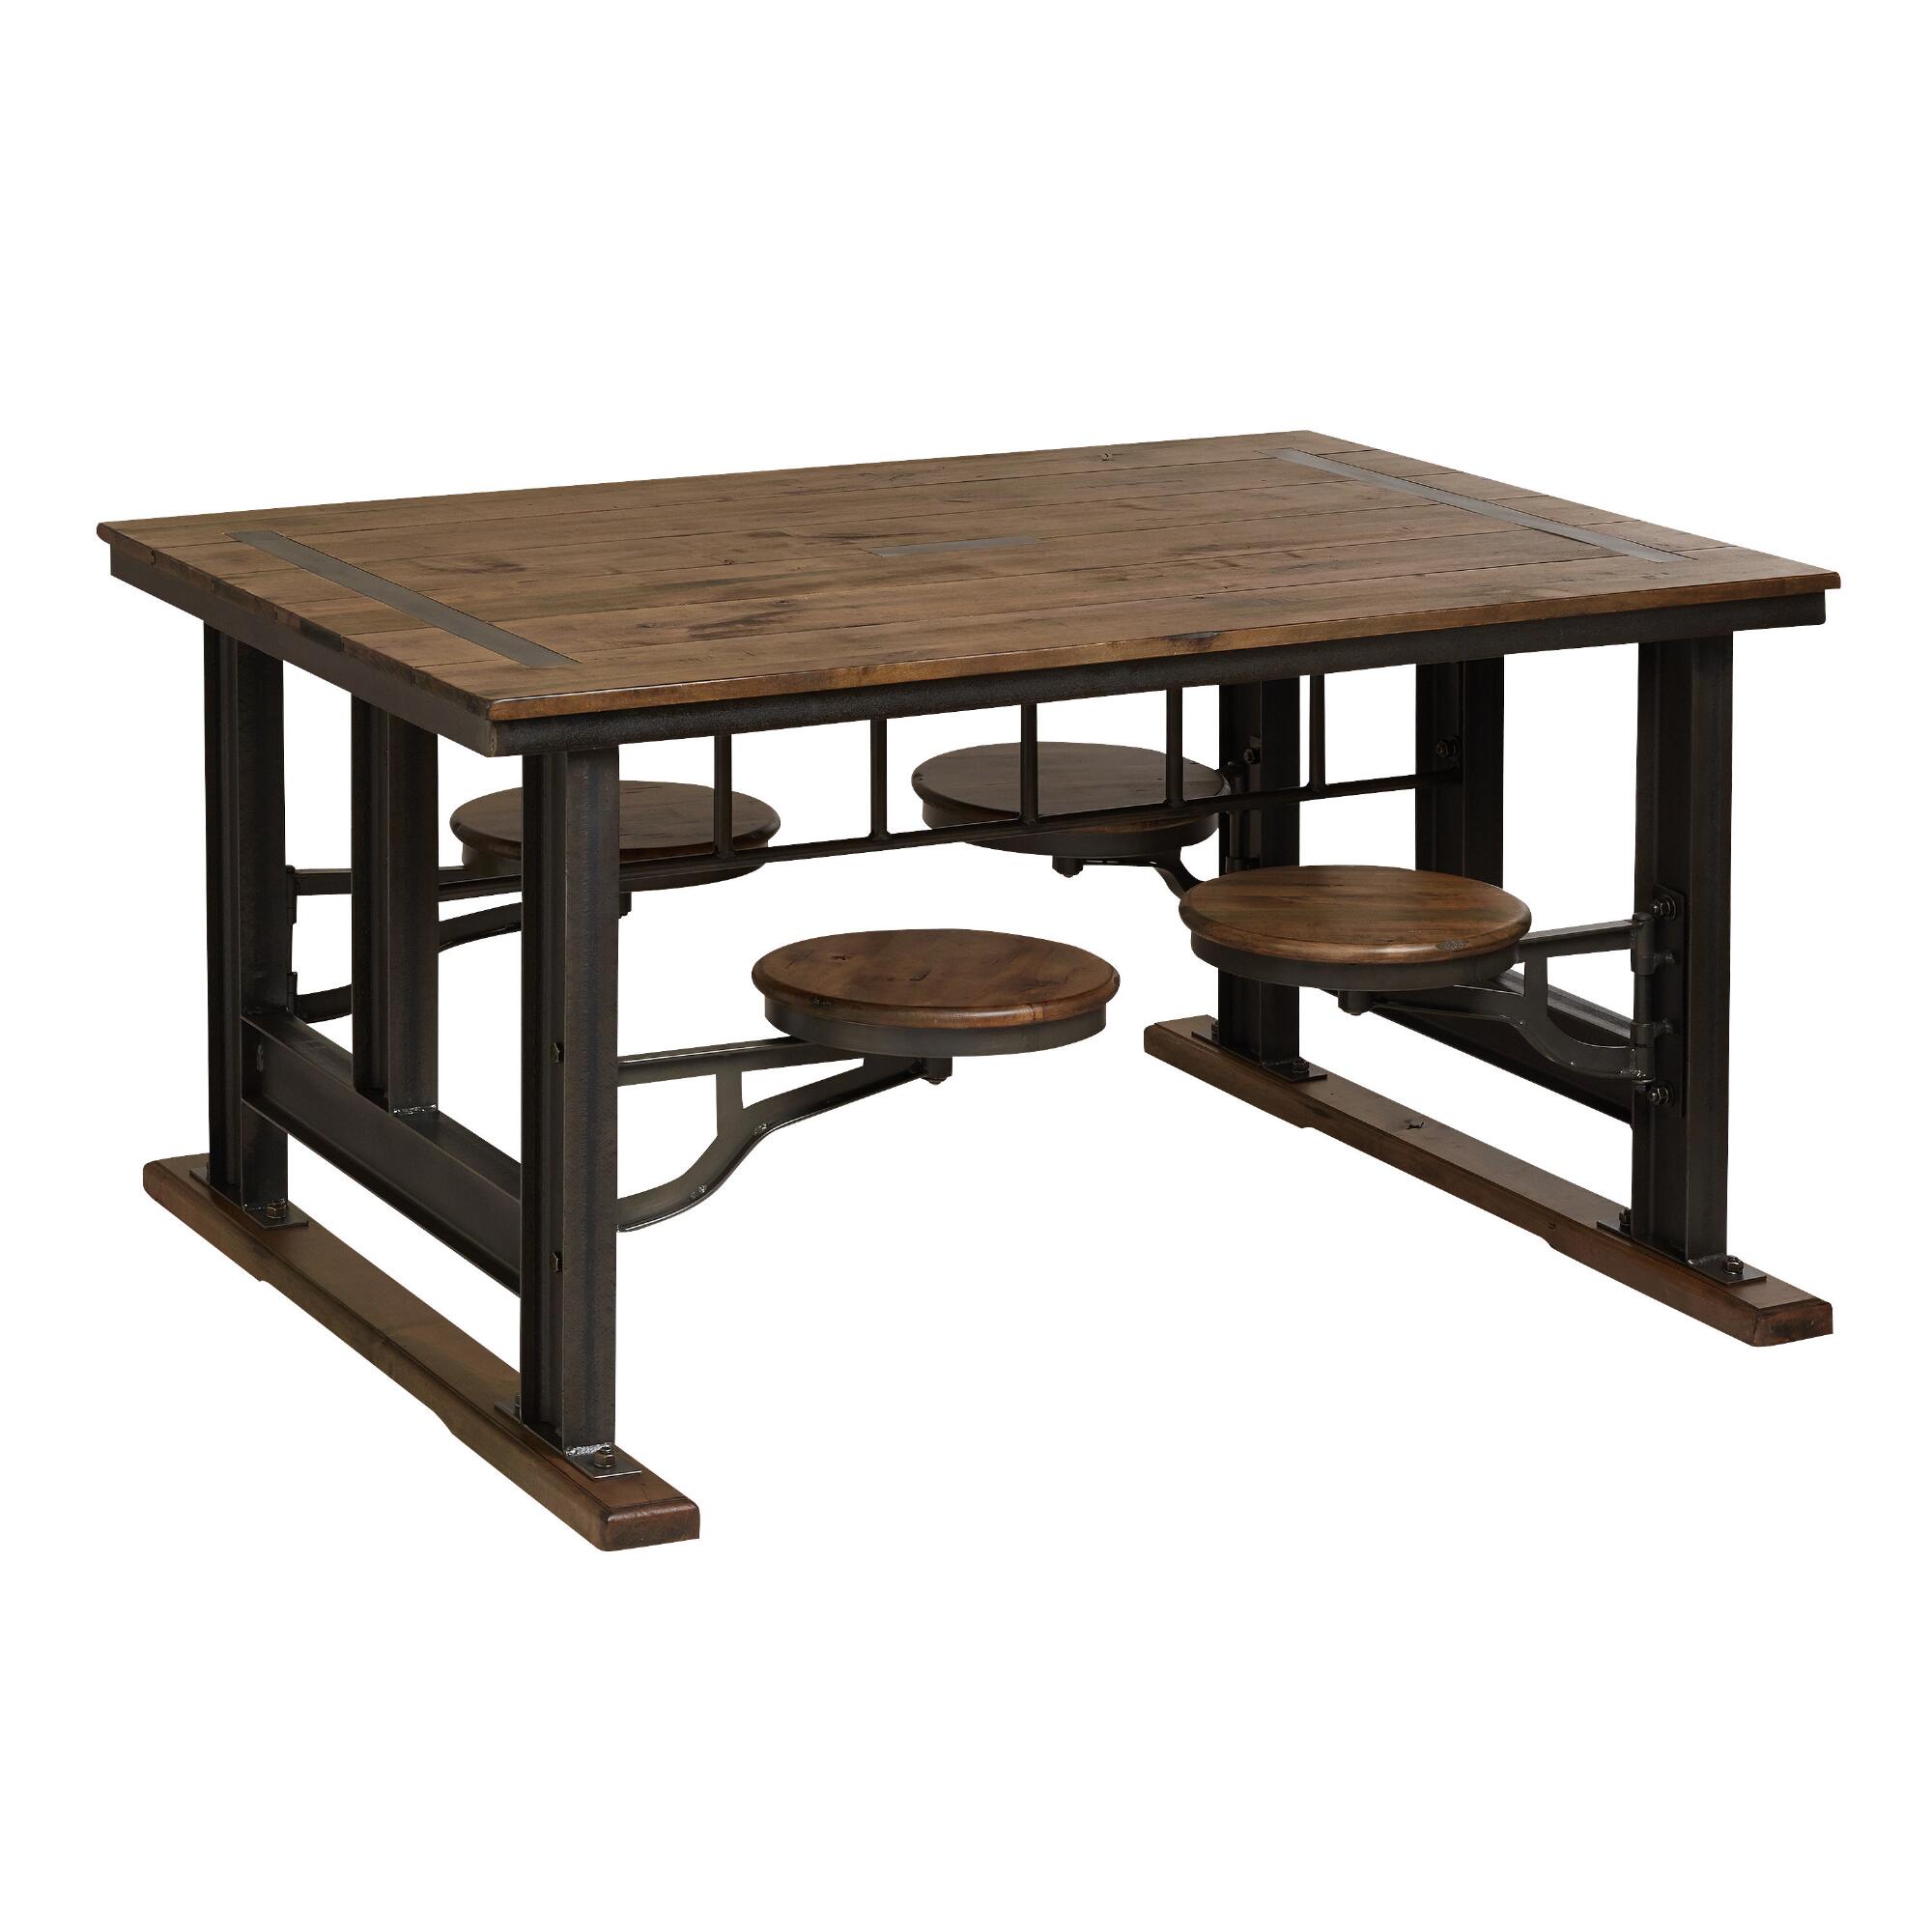 Galvin Cafeteria Table - Metal - Medium (61"-72"L) by World Market